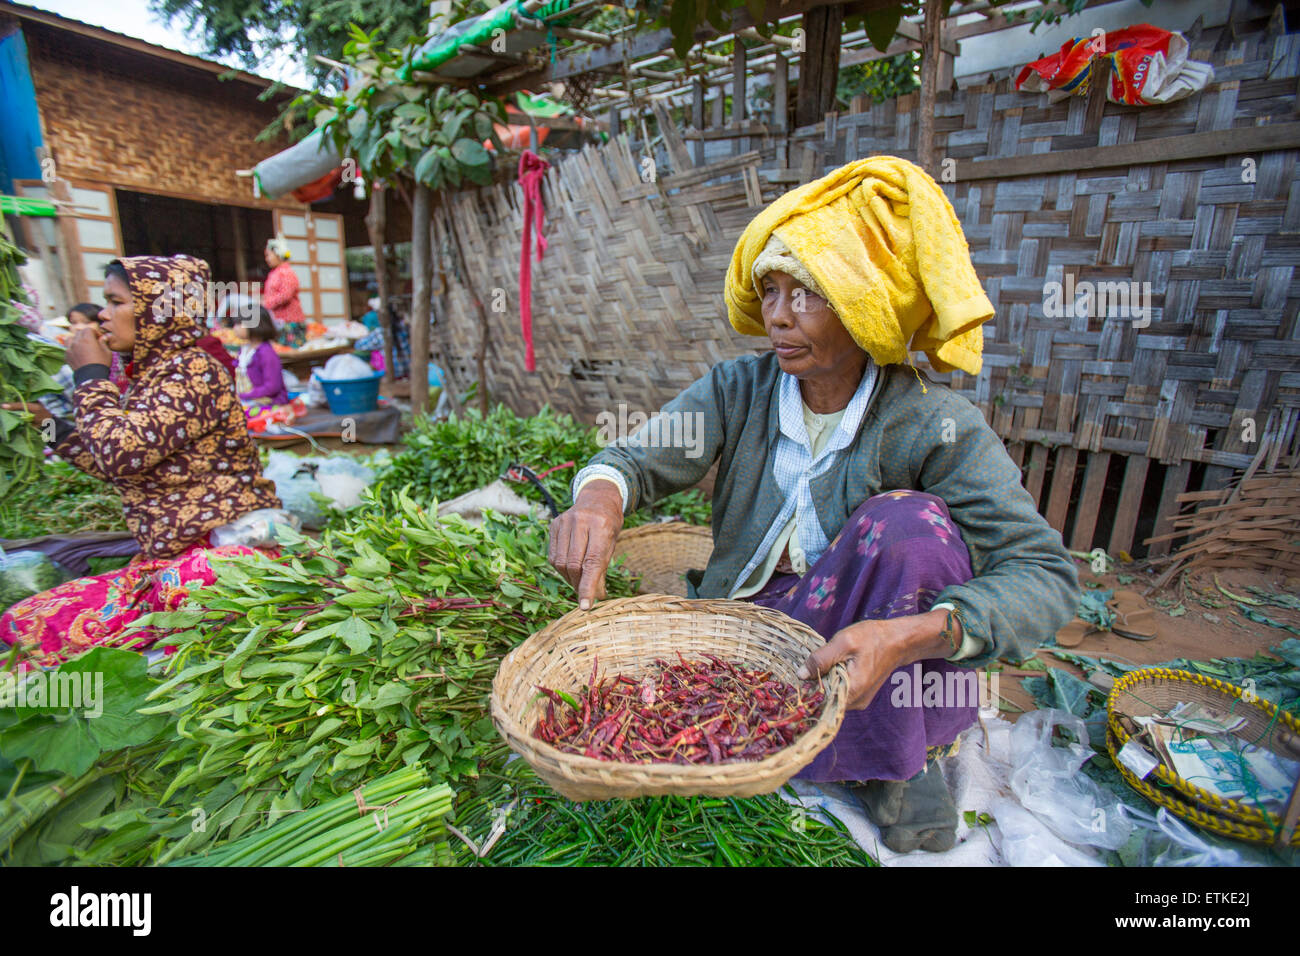 Woman selling chili peppers at market in Monywa Myanmar Stock Photo